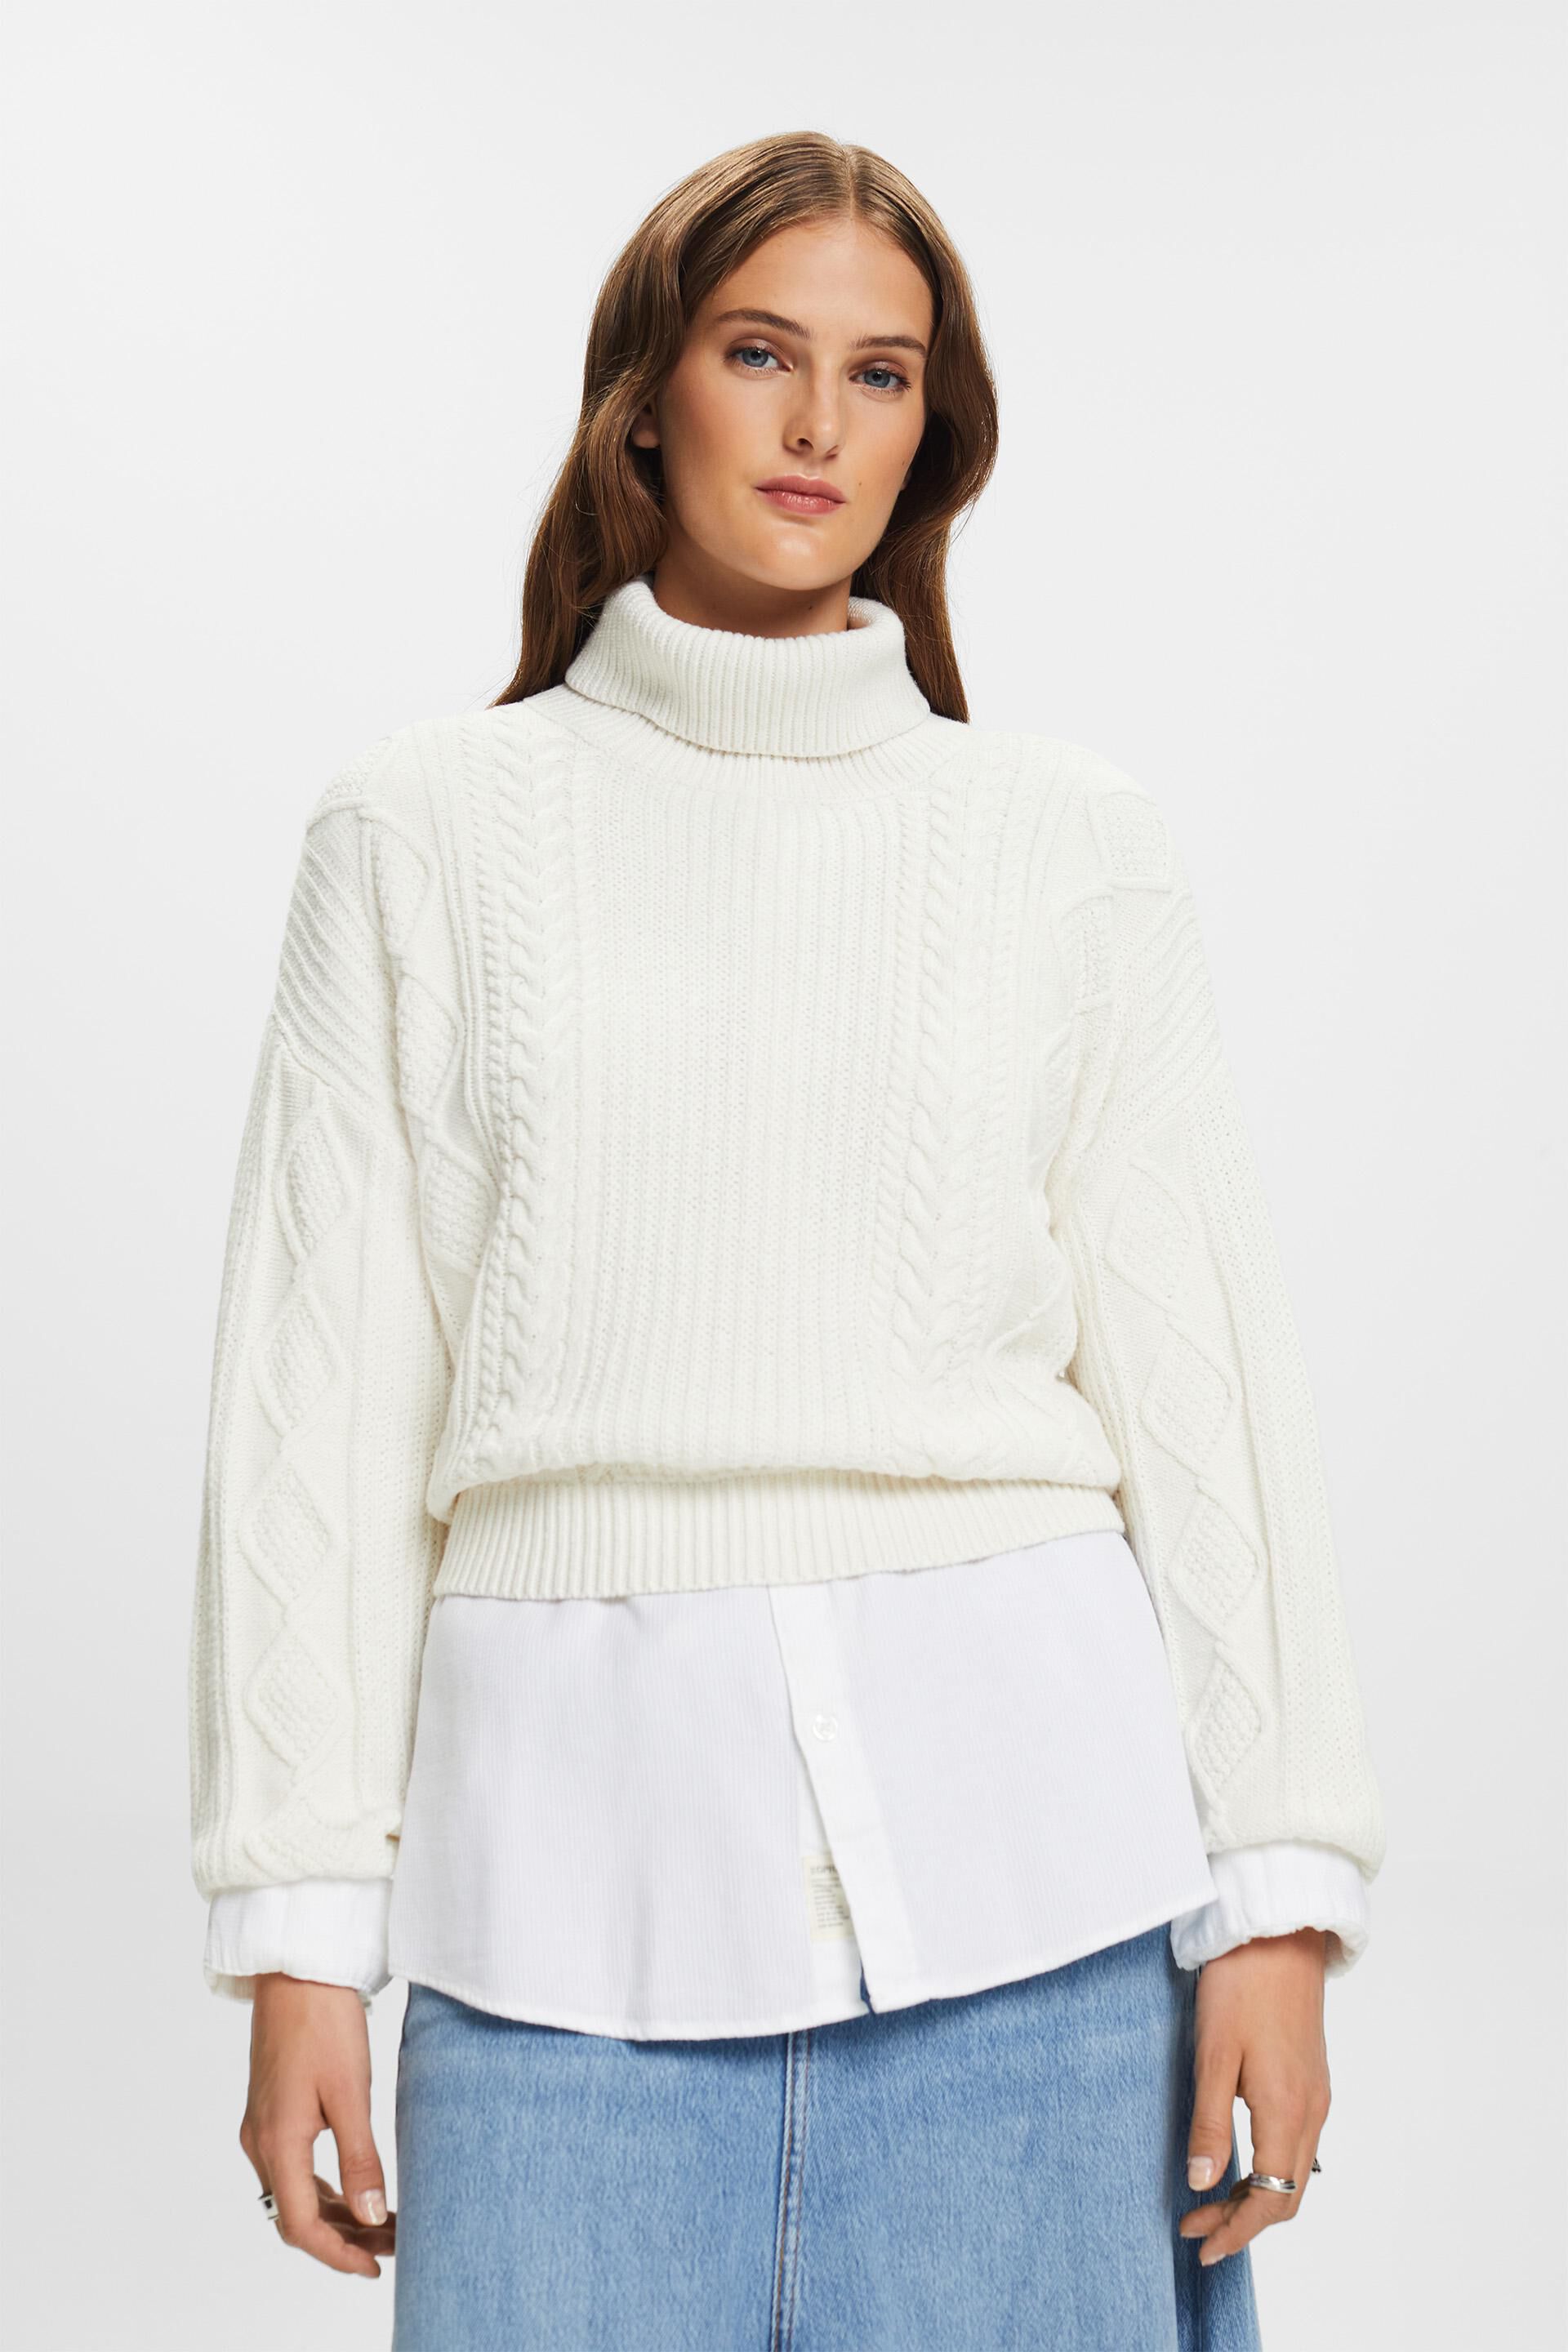 White Cable Knit Turtleneck